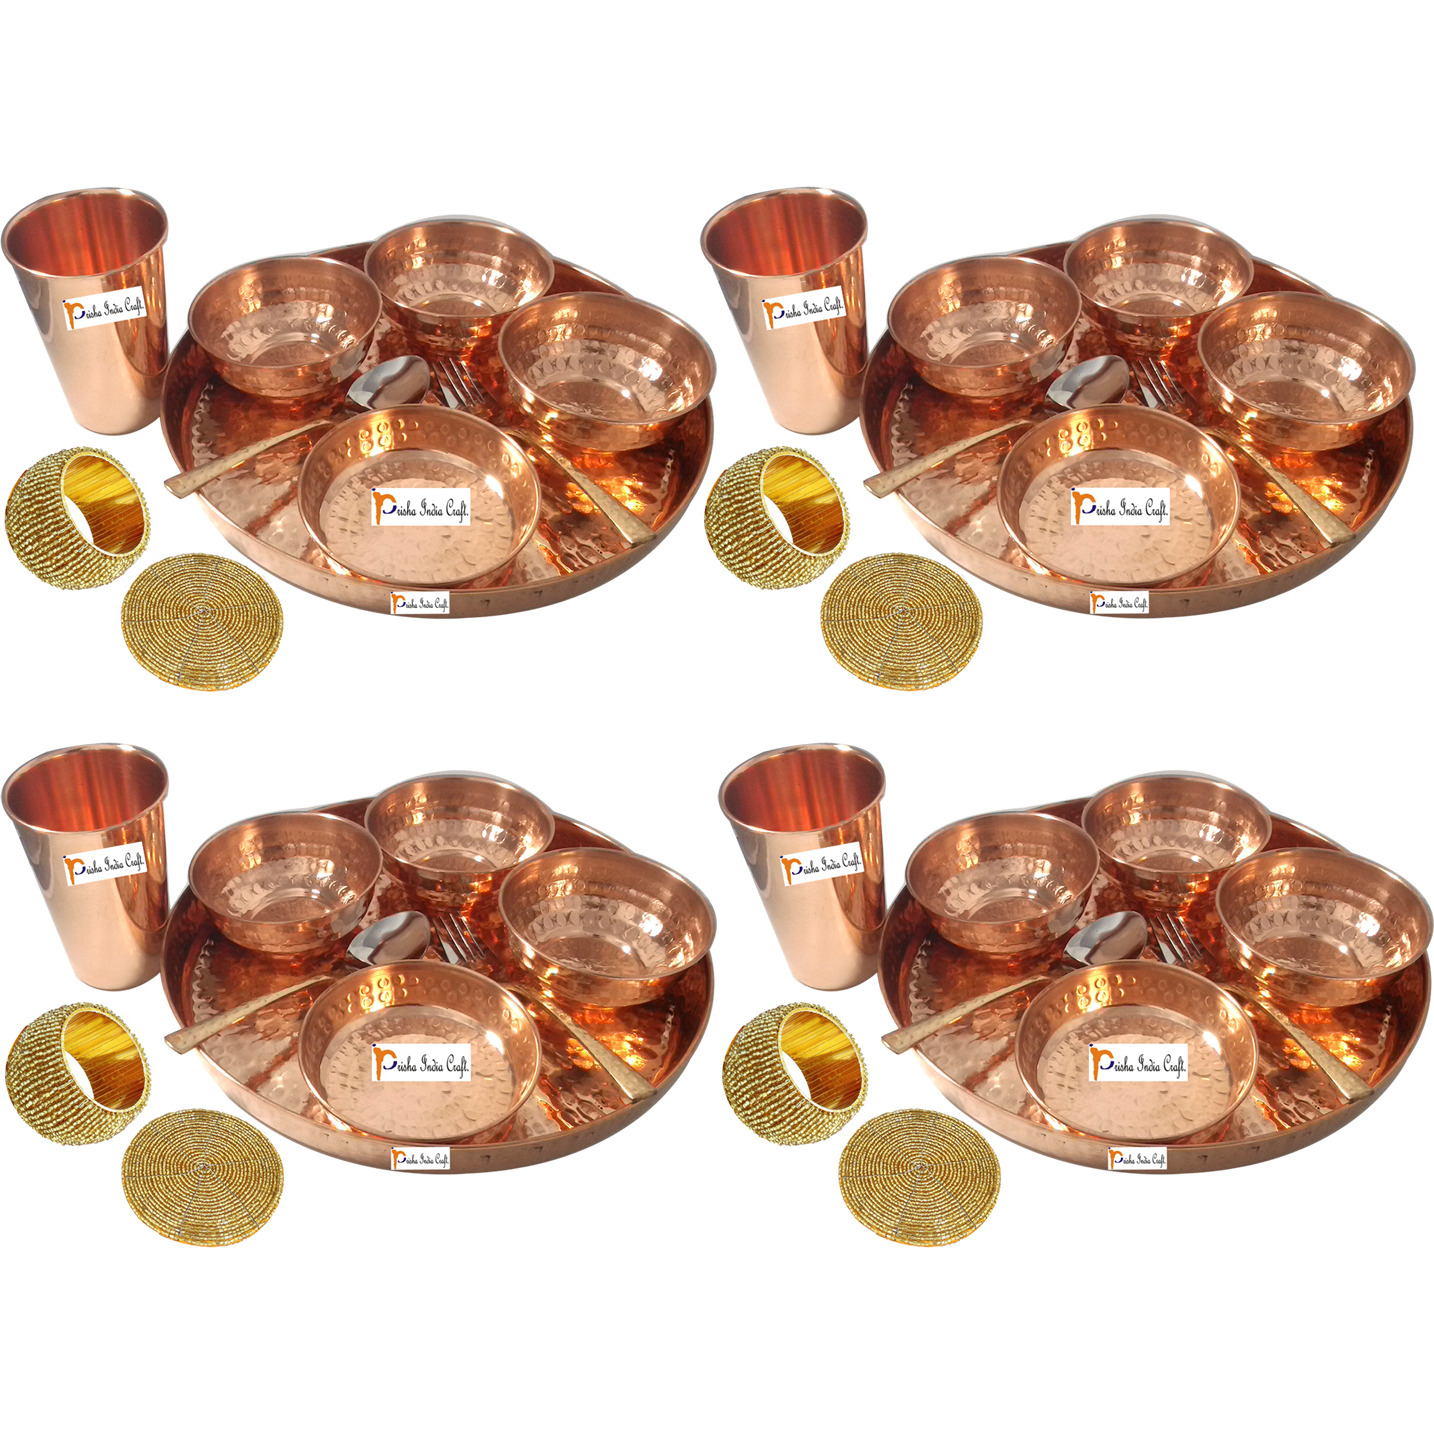 Set of 4 Prisha India Craft B. Dinnerware Pure Copper Thali Set Dia 12  Traditional Dinner Set of Plate, Bowl, Spoons, Glass with Napkin ring and Coaster - Christmas Gift